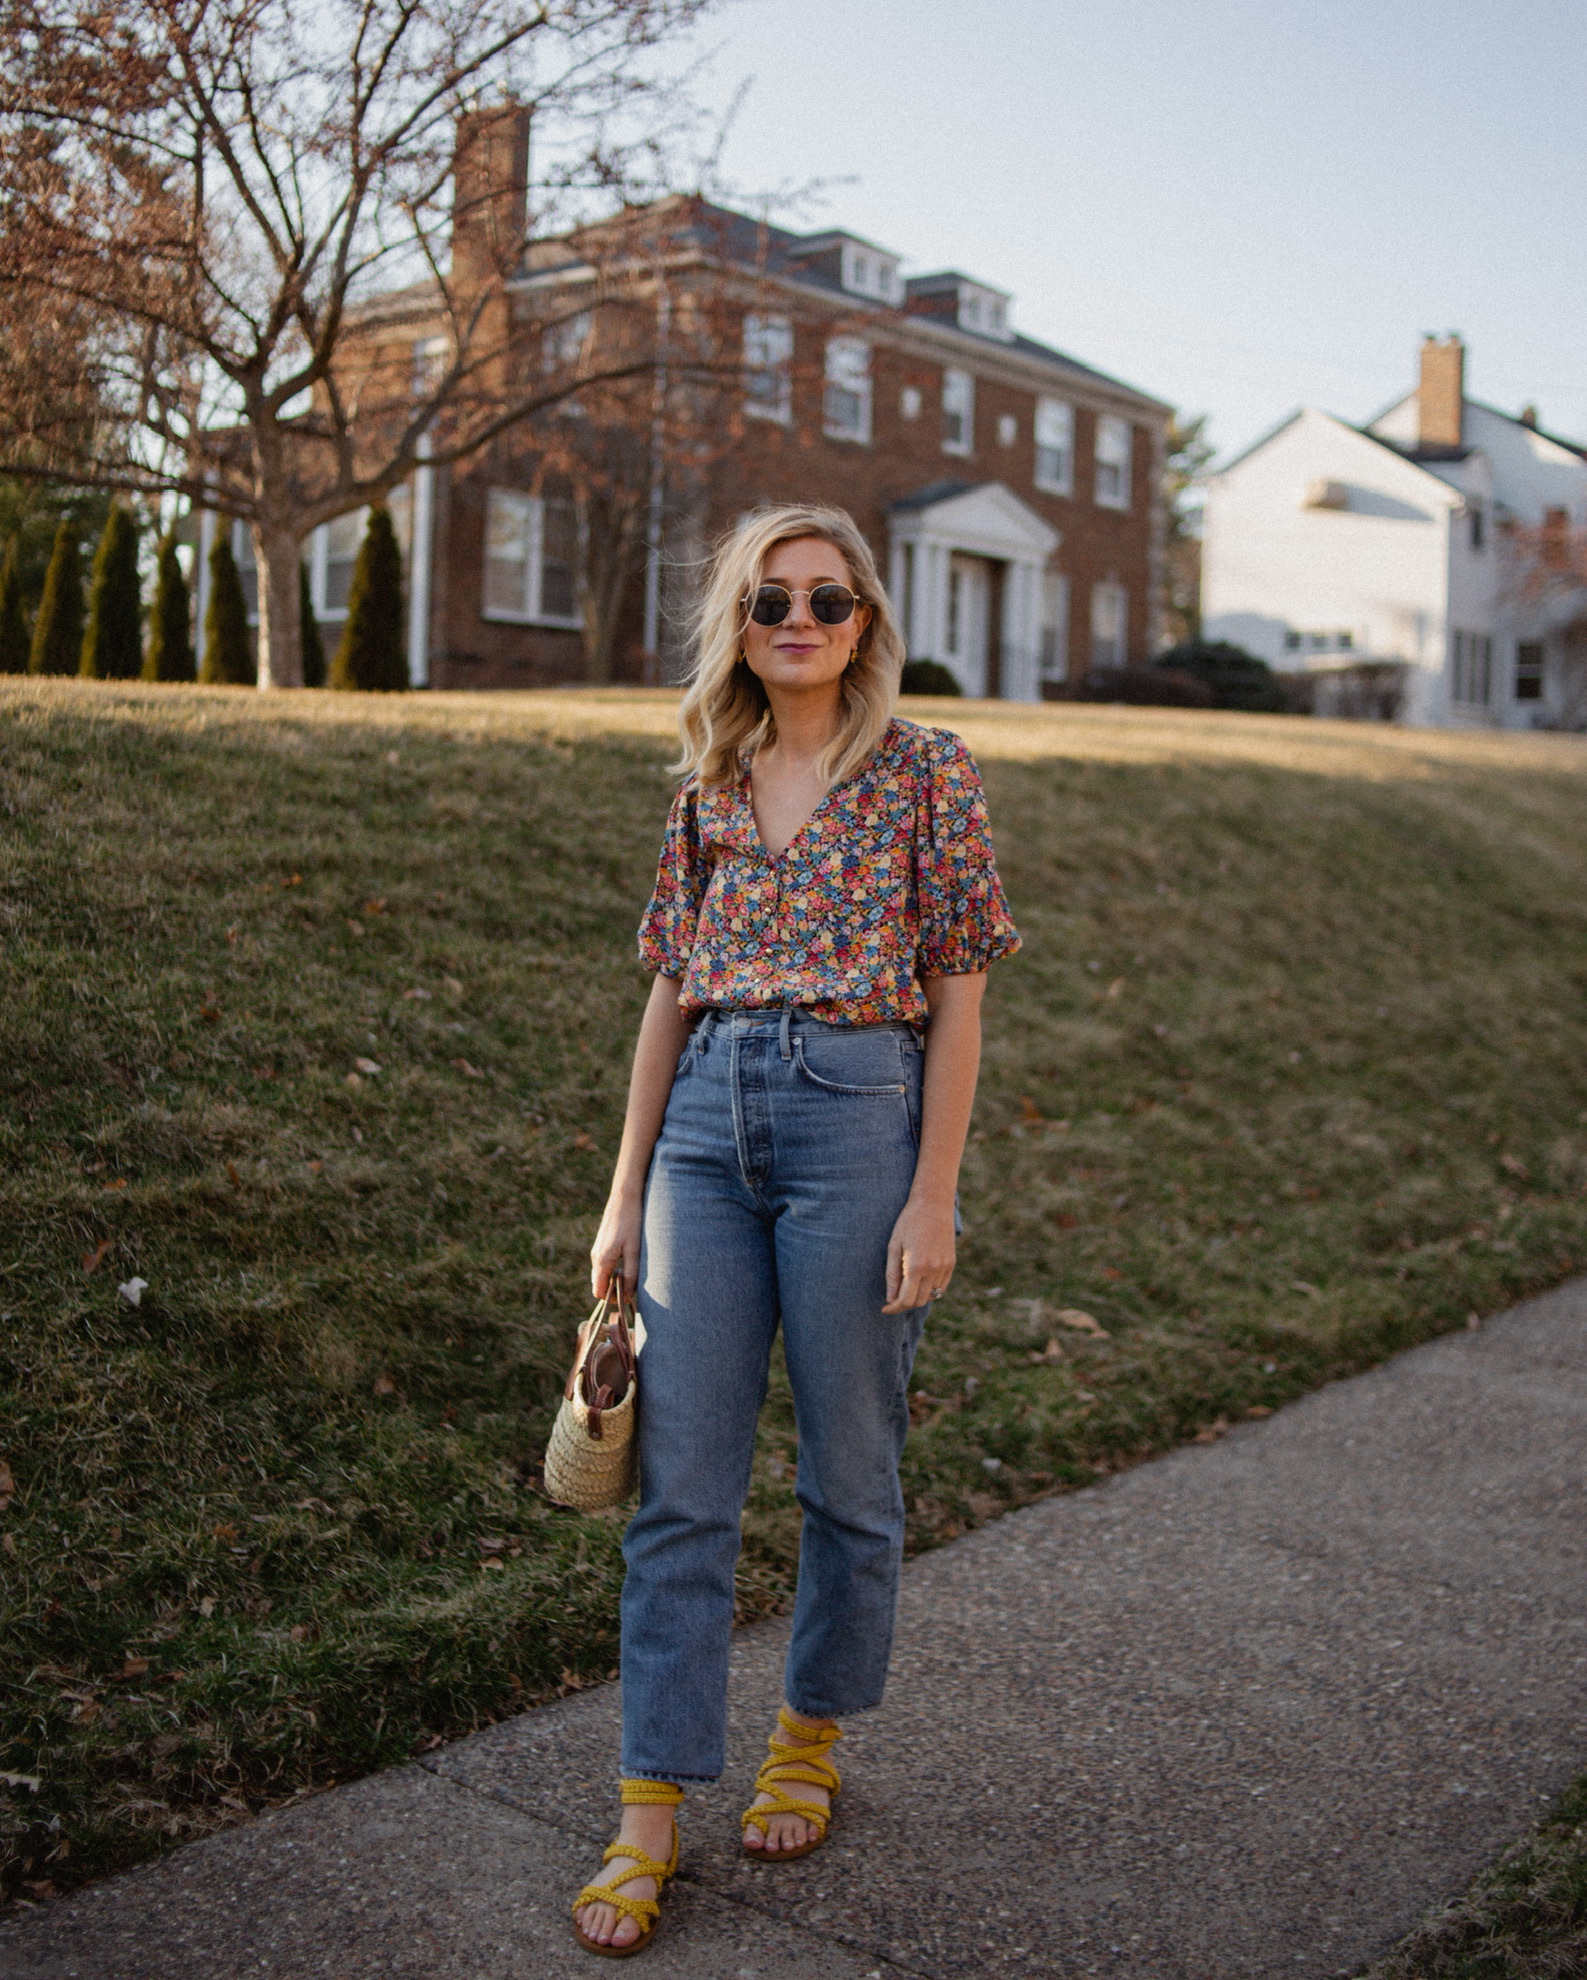 Karin Emily wears a floral top from Sezane, blue straight leg jeans from AGOLDE, and another pair of yellow wrap sandals from Sezane